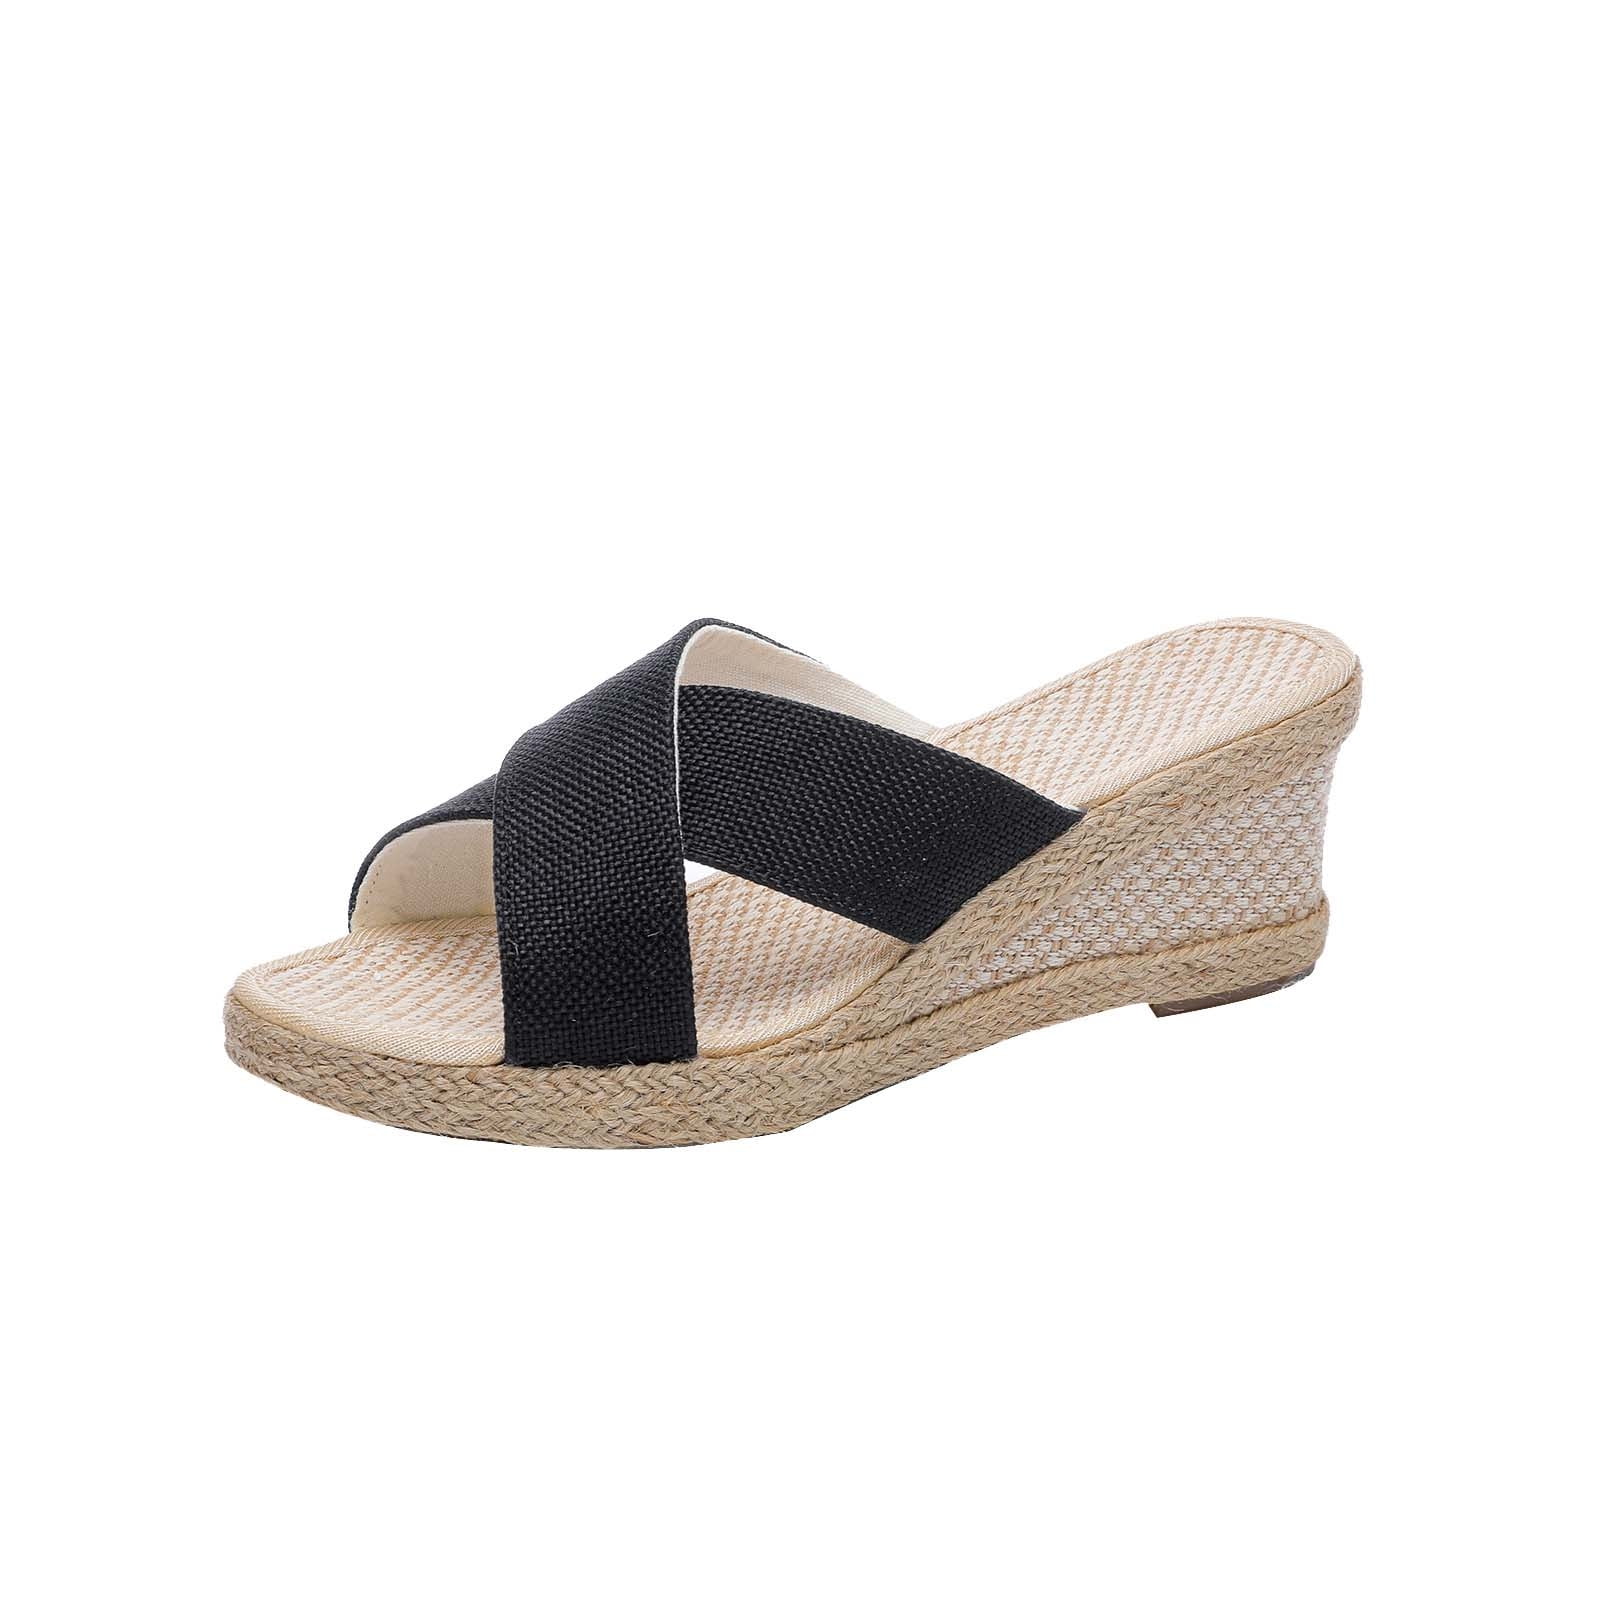 Why Espadrille Wedges Are the Best Summer Sandal